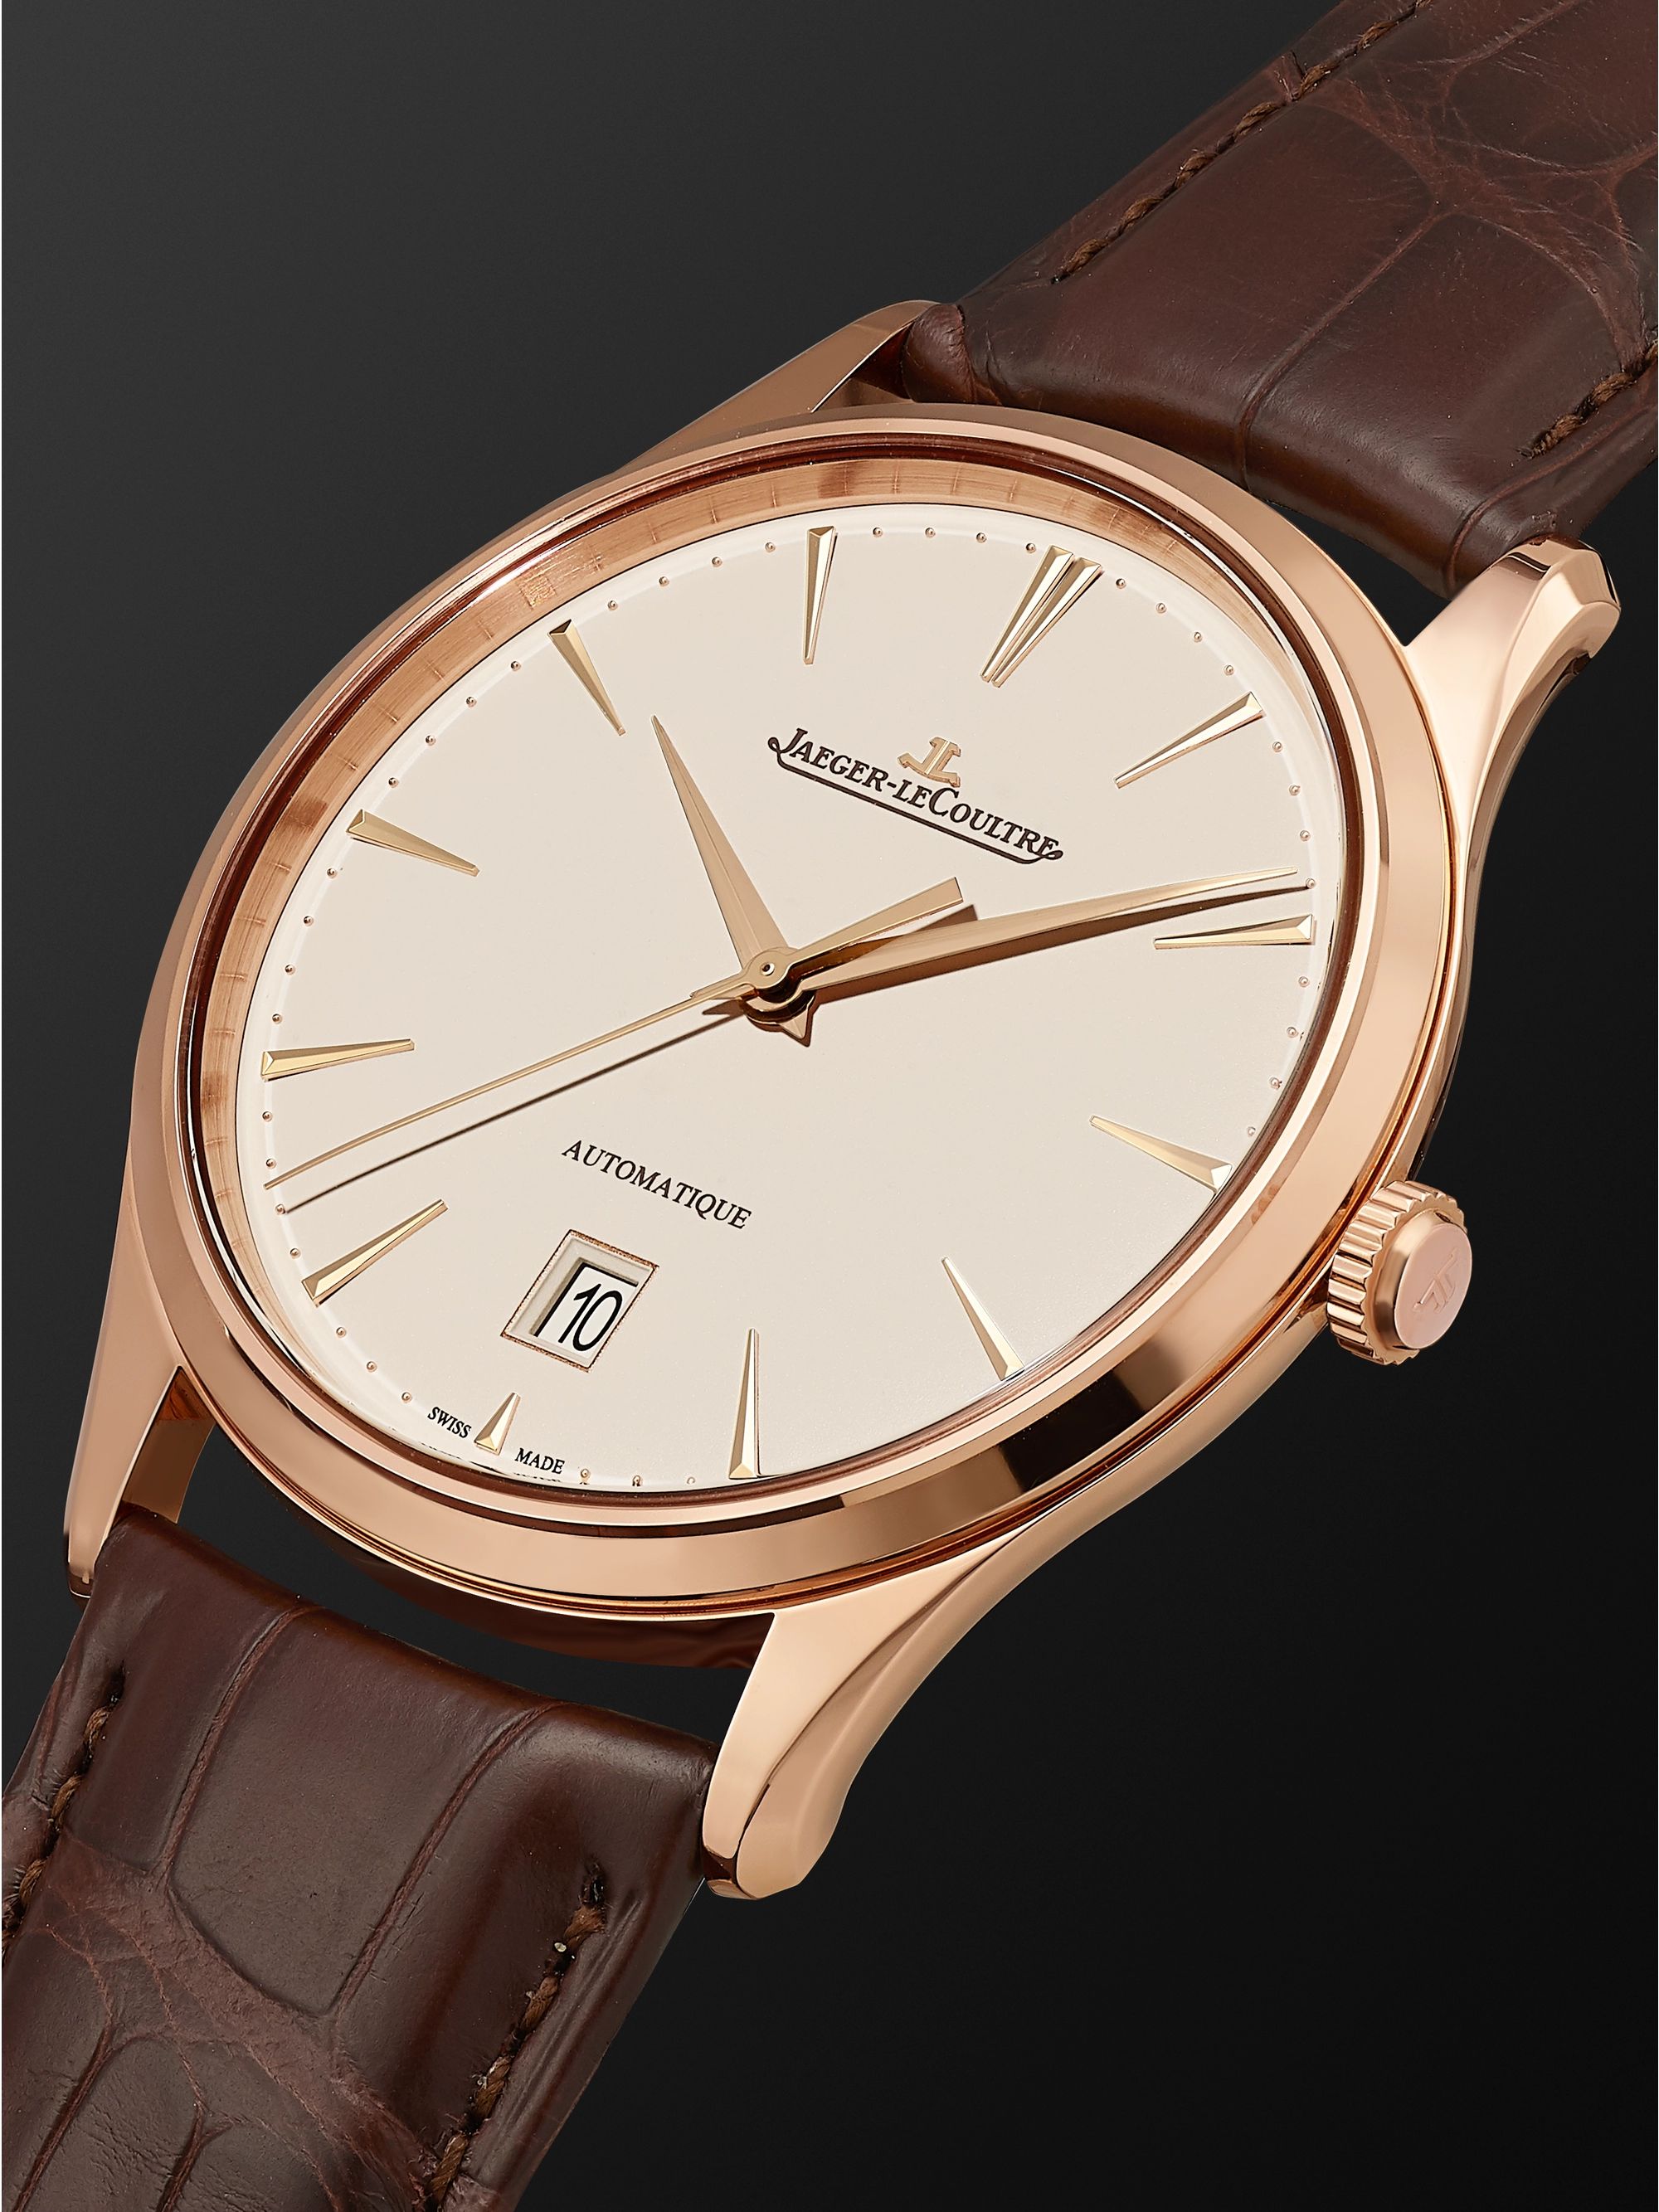 JAEGER-LECOULTRE Master Ultra Thin Date Automatic 39mm 18-Karat Rose Gold and Alligator Watch, Ref No. 1232510